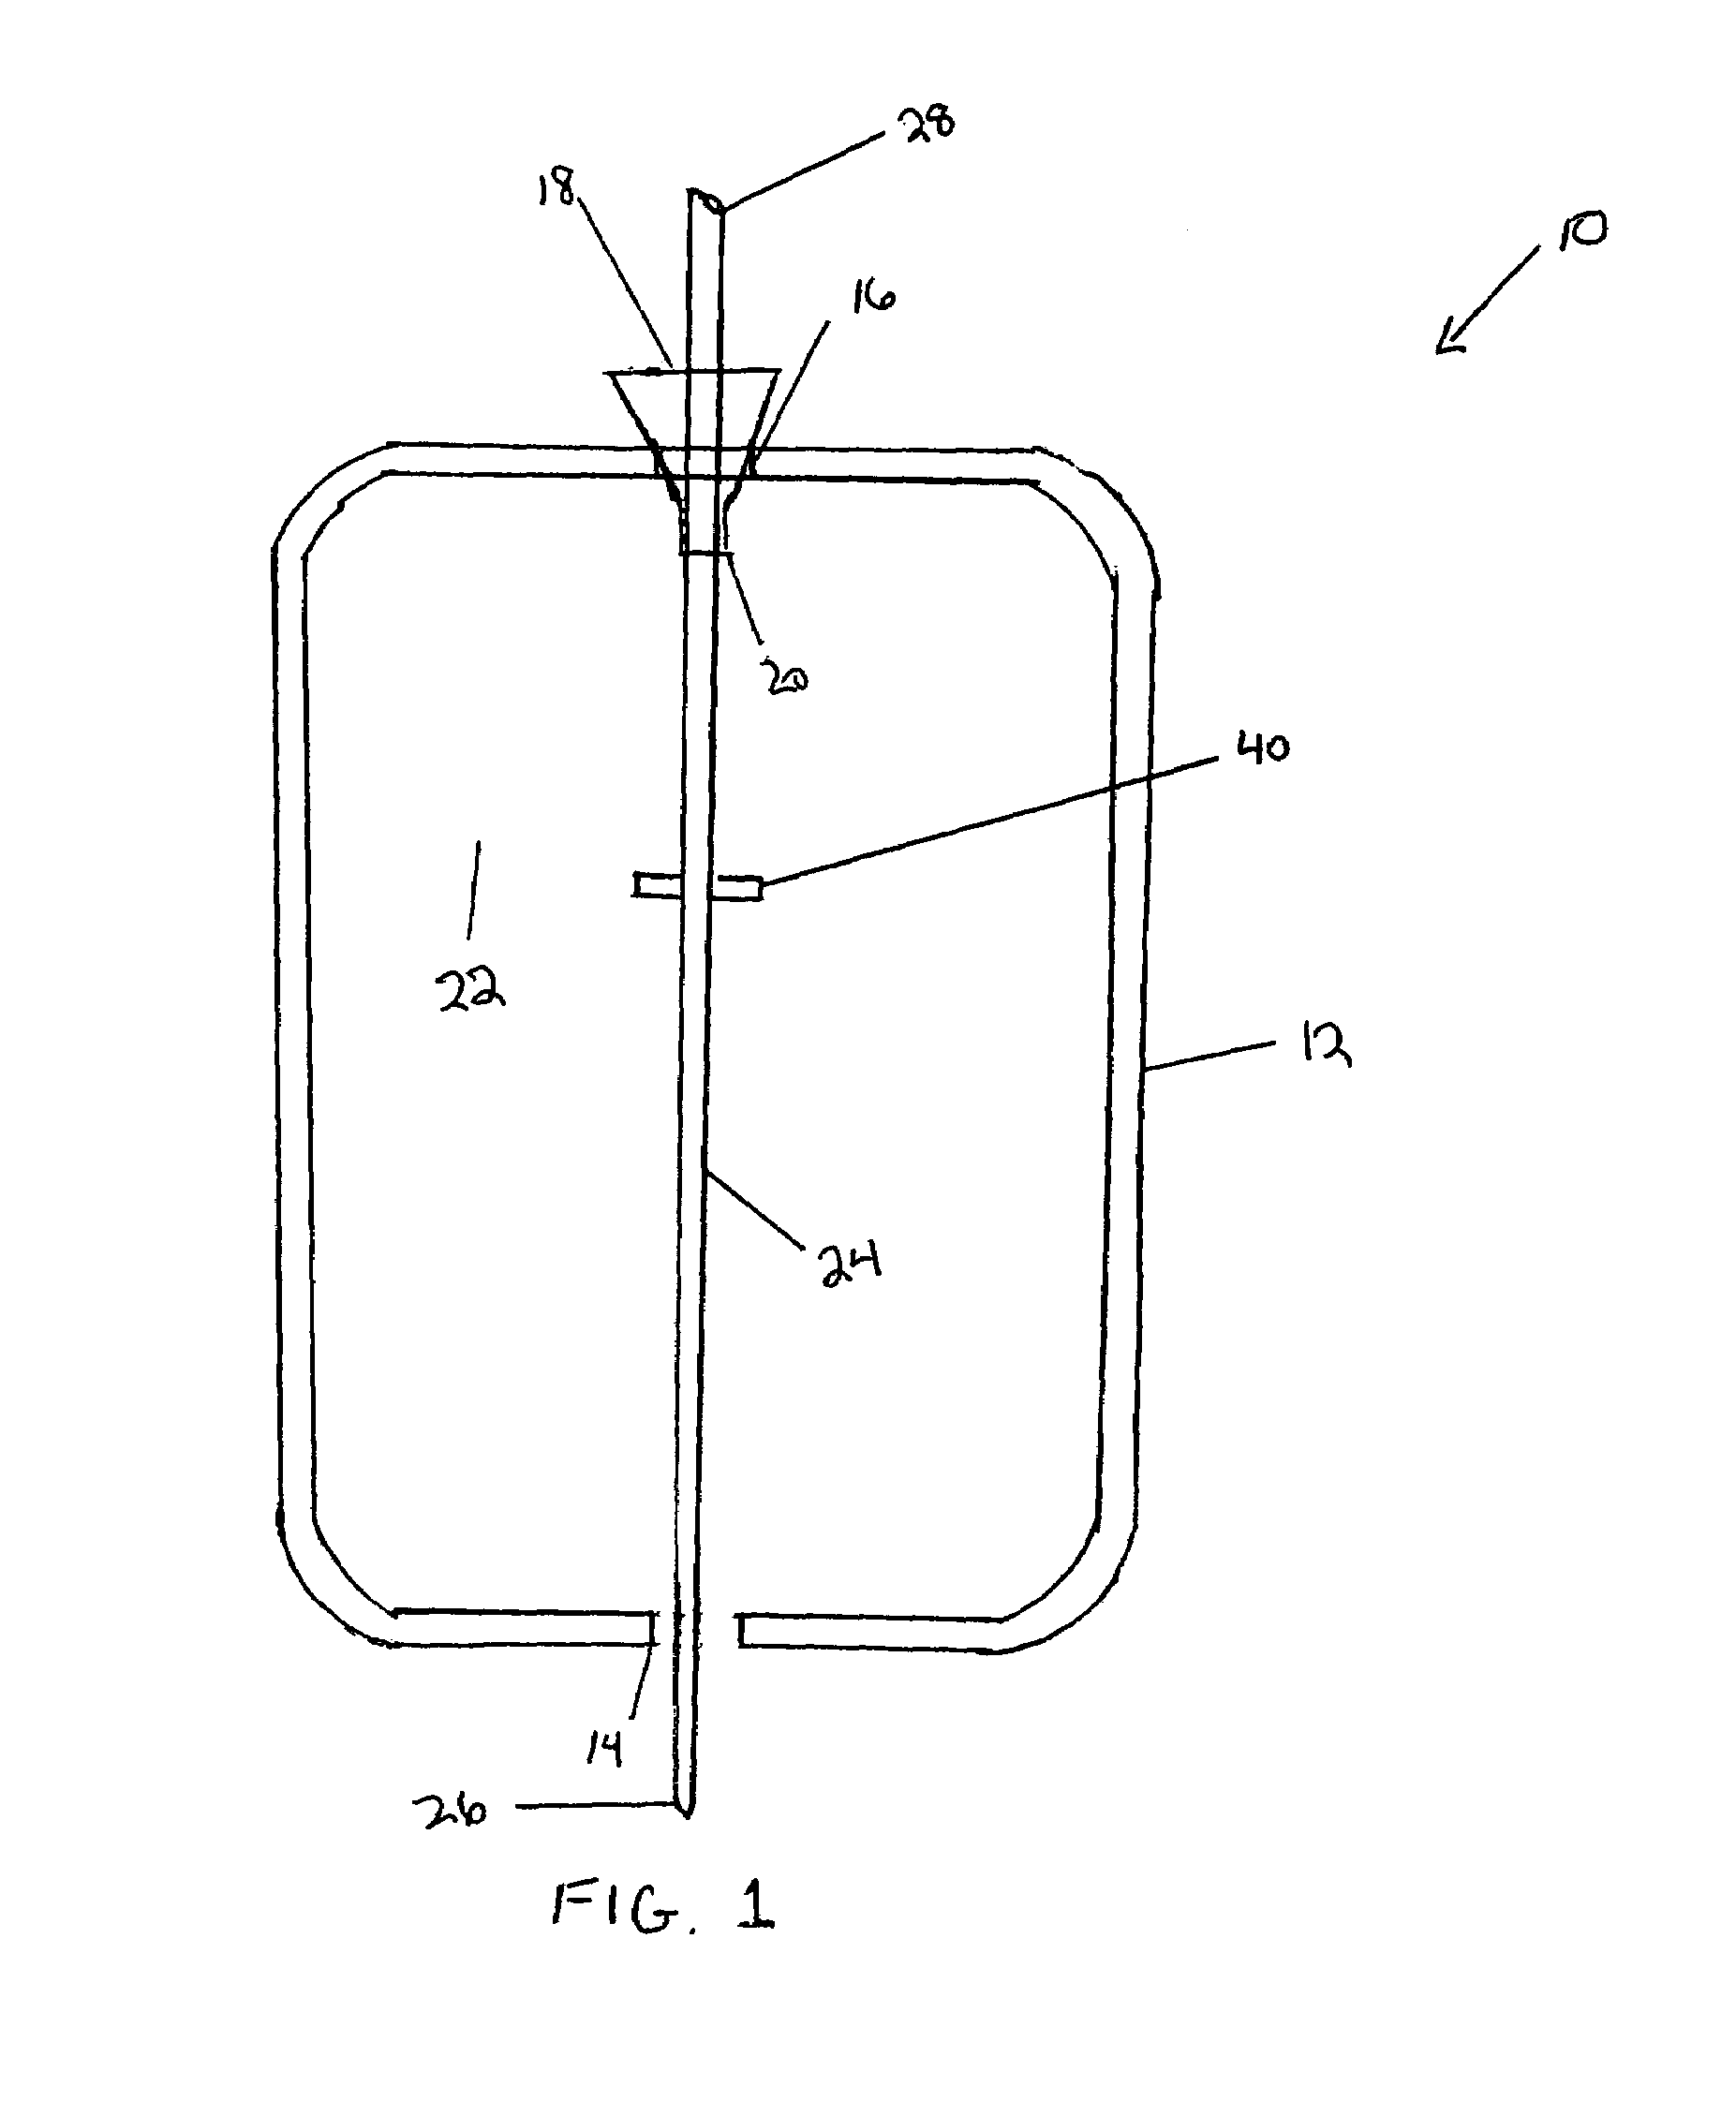 In-situ BWR and PWR CRUD flake analysis method and tool